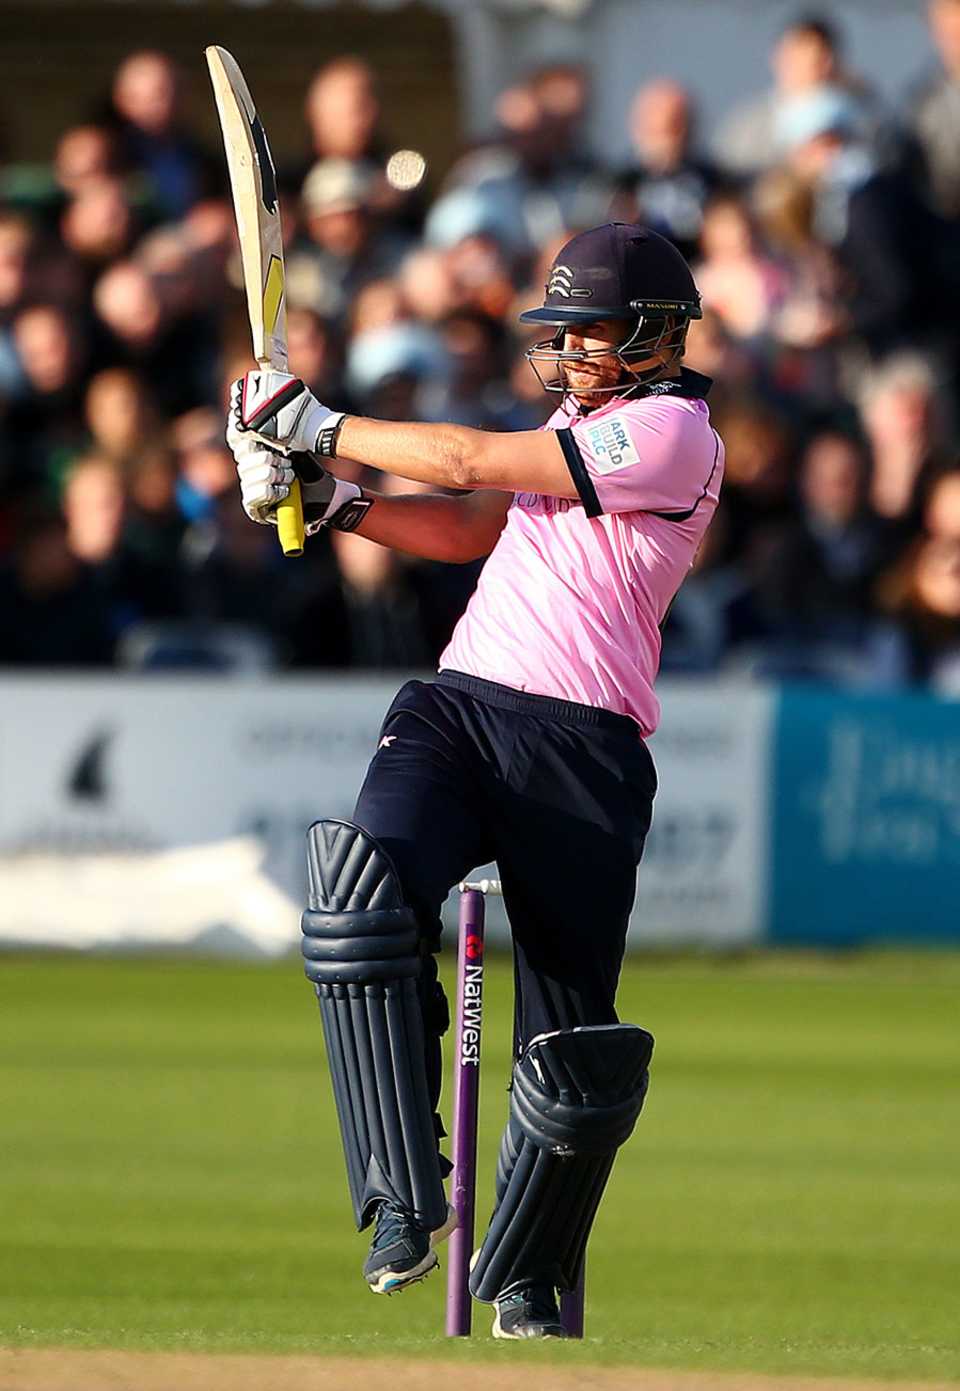 Dawid Malan plundered the Sussex bowling with 115 off 64 balls, Sussex v Middlesex, NatWest T20 Blast, South Group, Hove, May 29, 2015